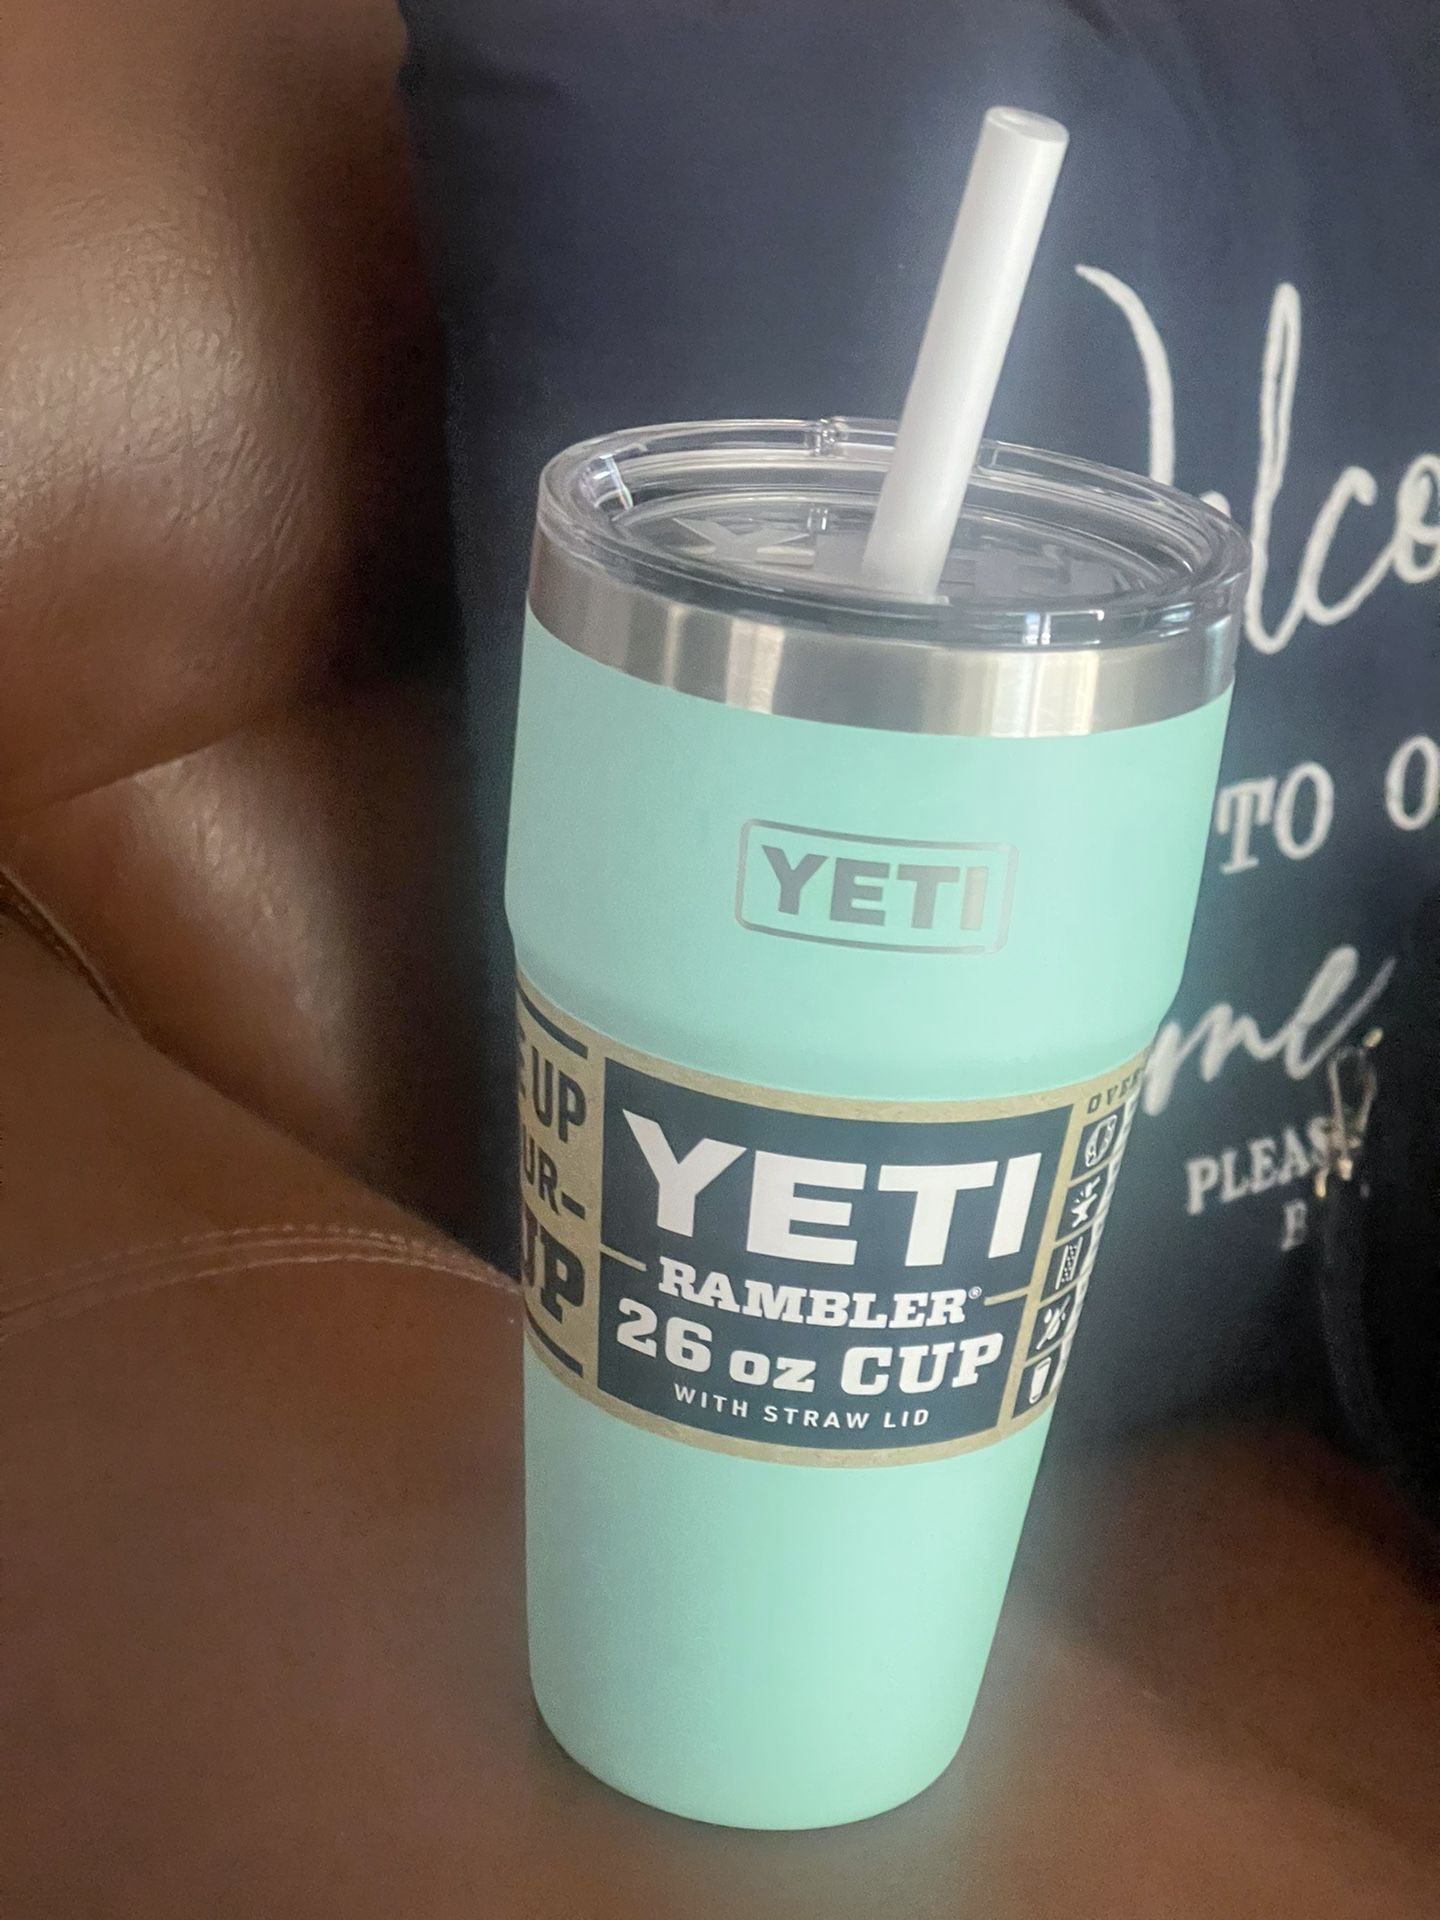 Custom Engraved Yeti Stanley Hydroflask Ramblers Tumblers Cups Mugs for  Sale in Garden Grove, CA - OfferUp